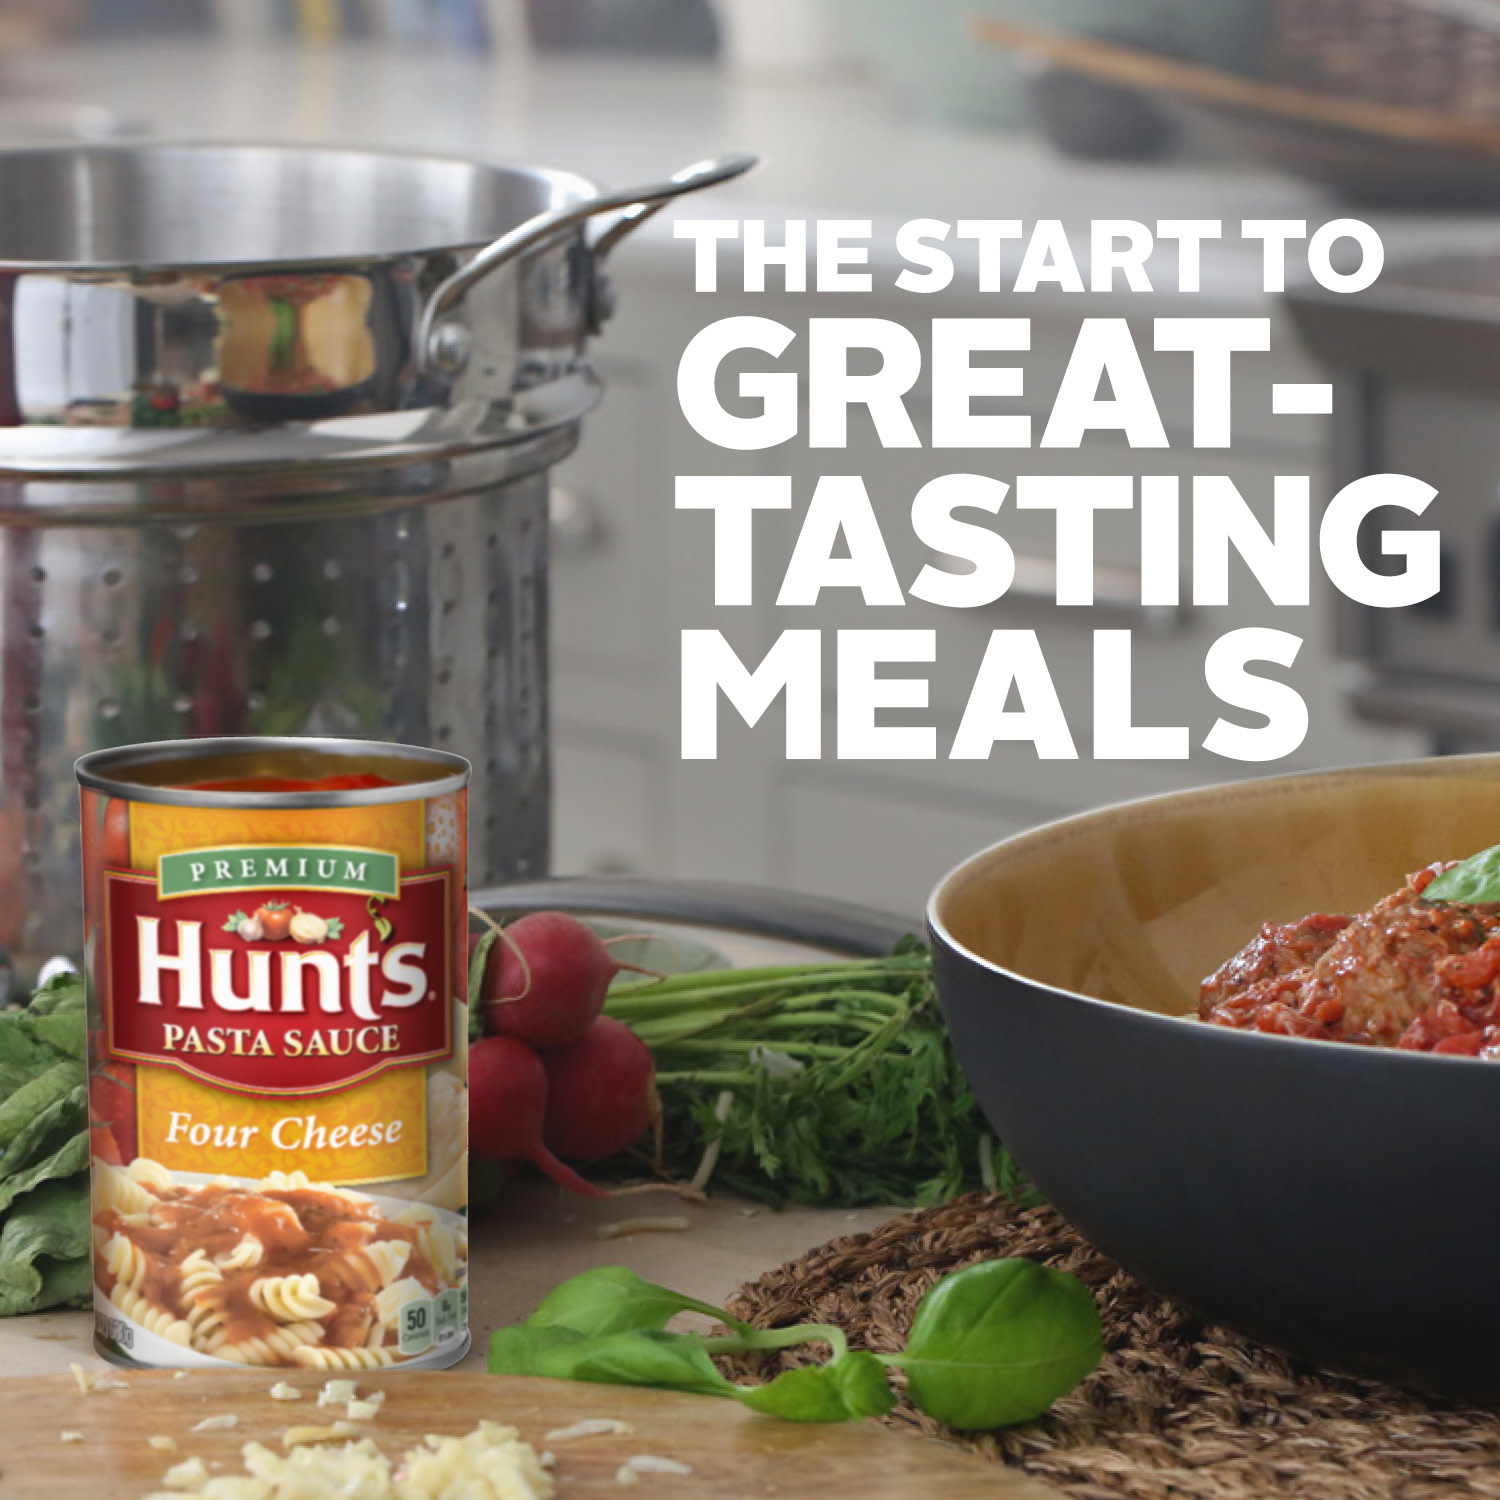 Hunt's Four Cheese Pasta Sauce, 100% Natural Tomato Sauce, Spaghetti Sauce, 24 oz Can - image 3 of 10